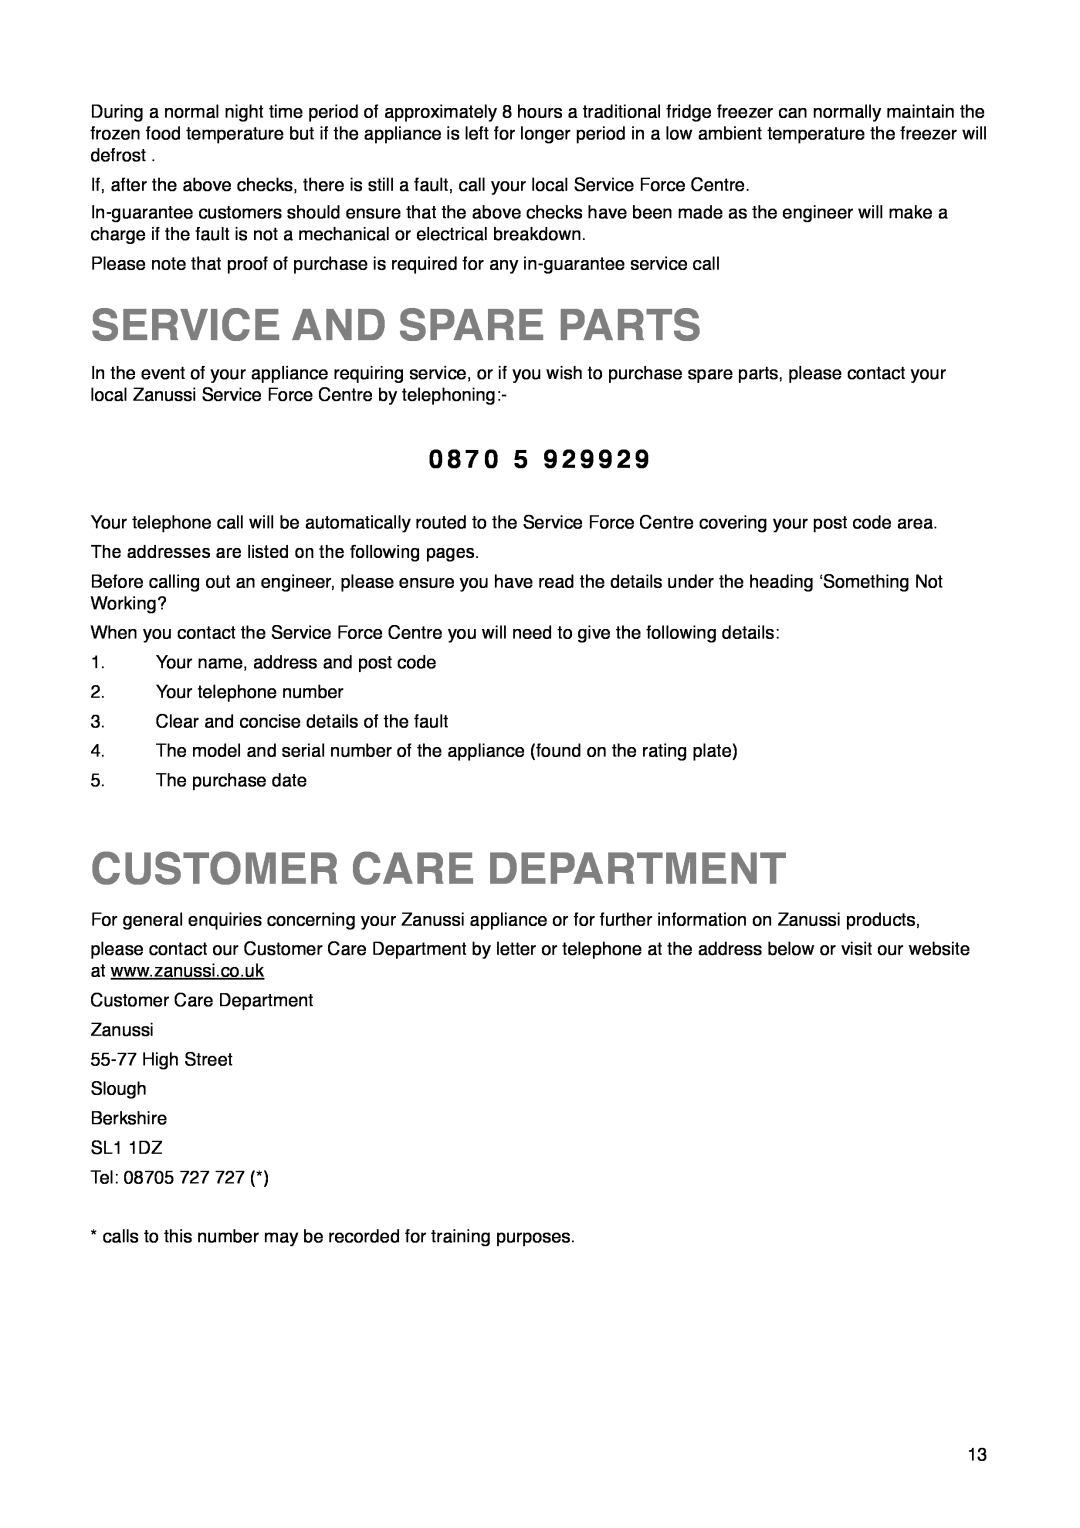 Zanussi ZKR 59/39 RN manual Service And Spare Parts, Customer Care Department, 0 8 7 0 5 9 2 9 